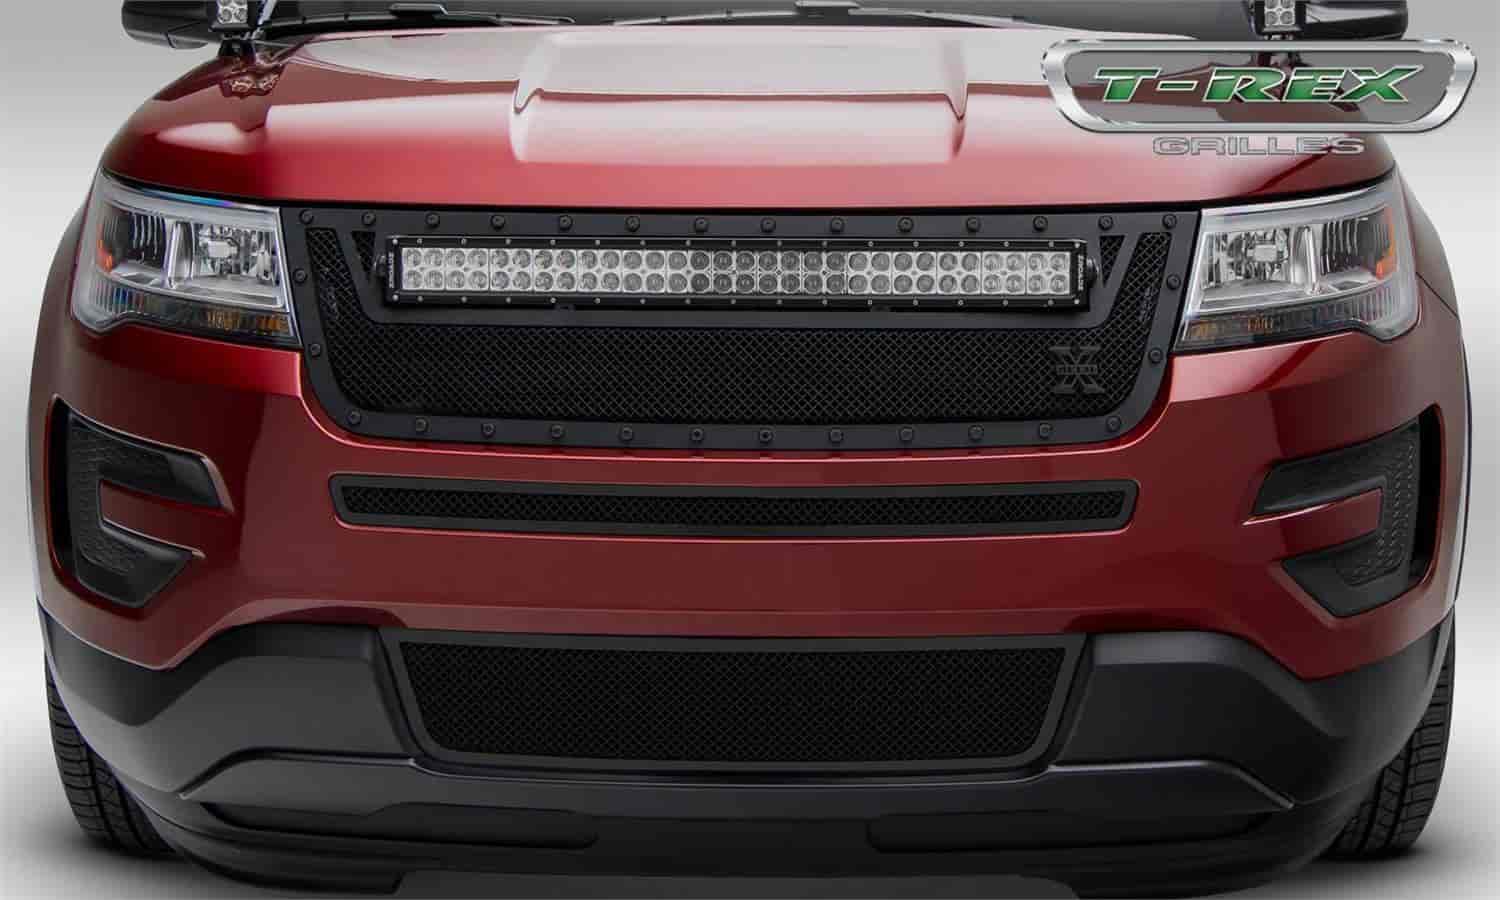 Ford Explorer TORCH Series LED Light Grille 1 - 30 Curved LED Bar Formed Mesh Grille Main Replacemen